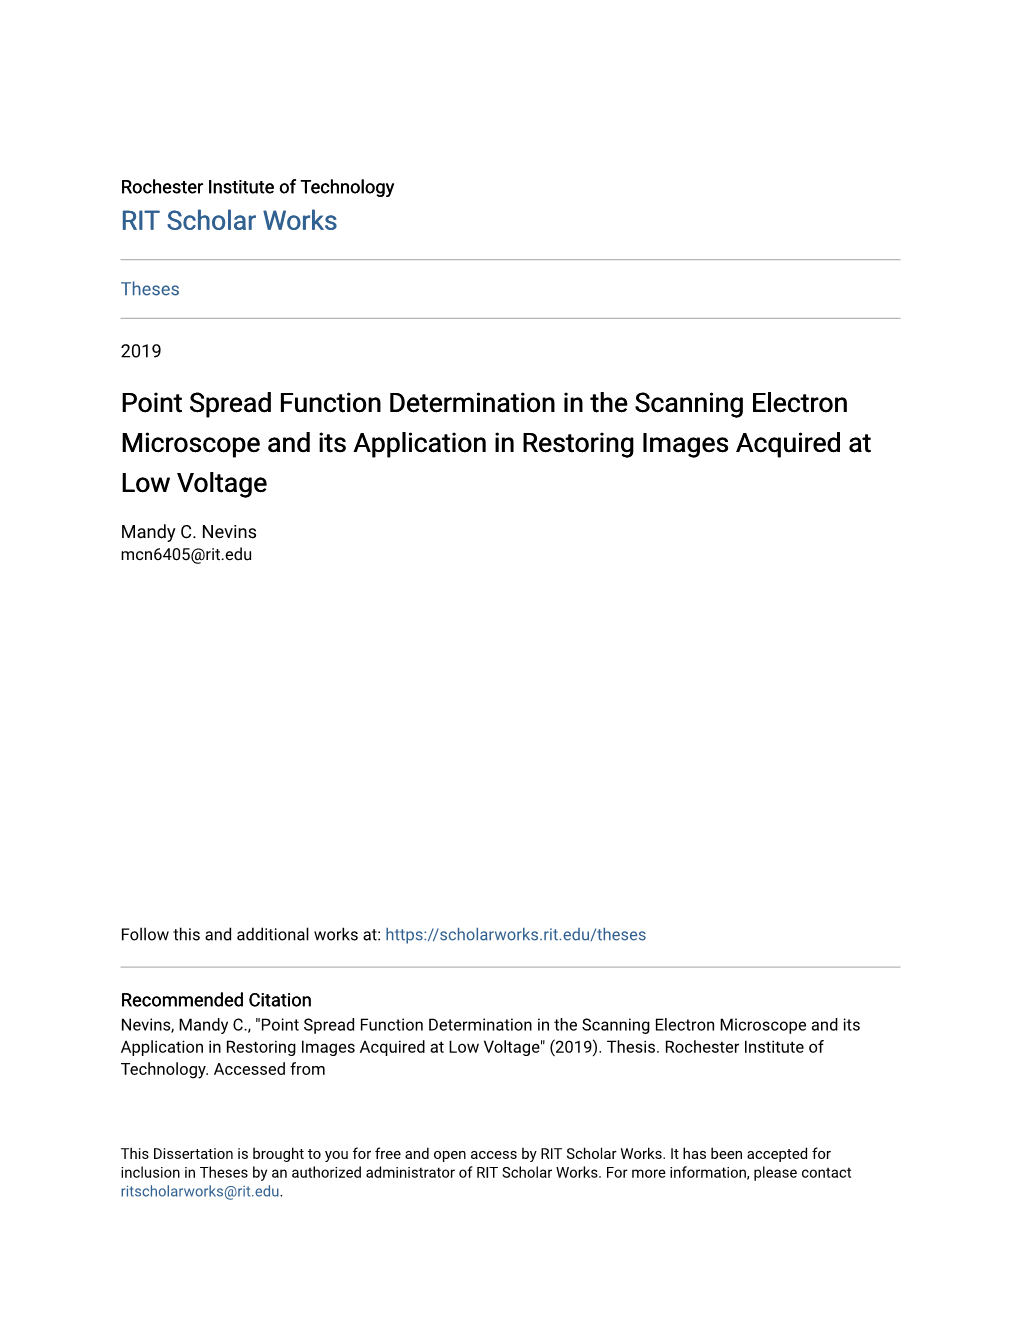 Point Spread Function Determination in the Scanning Electron Microscope and Its Application in Restoring Images Acquired at Low Voltage